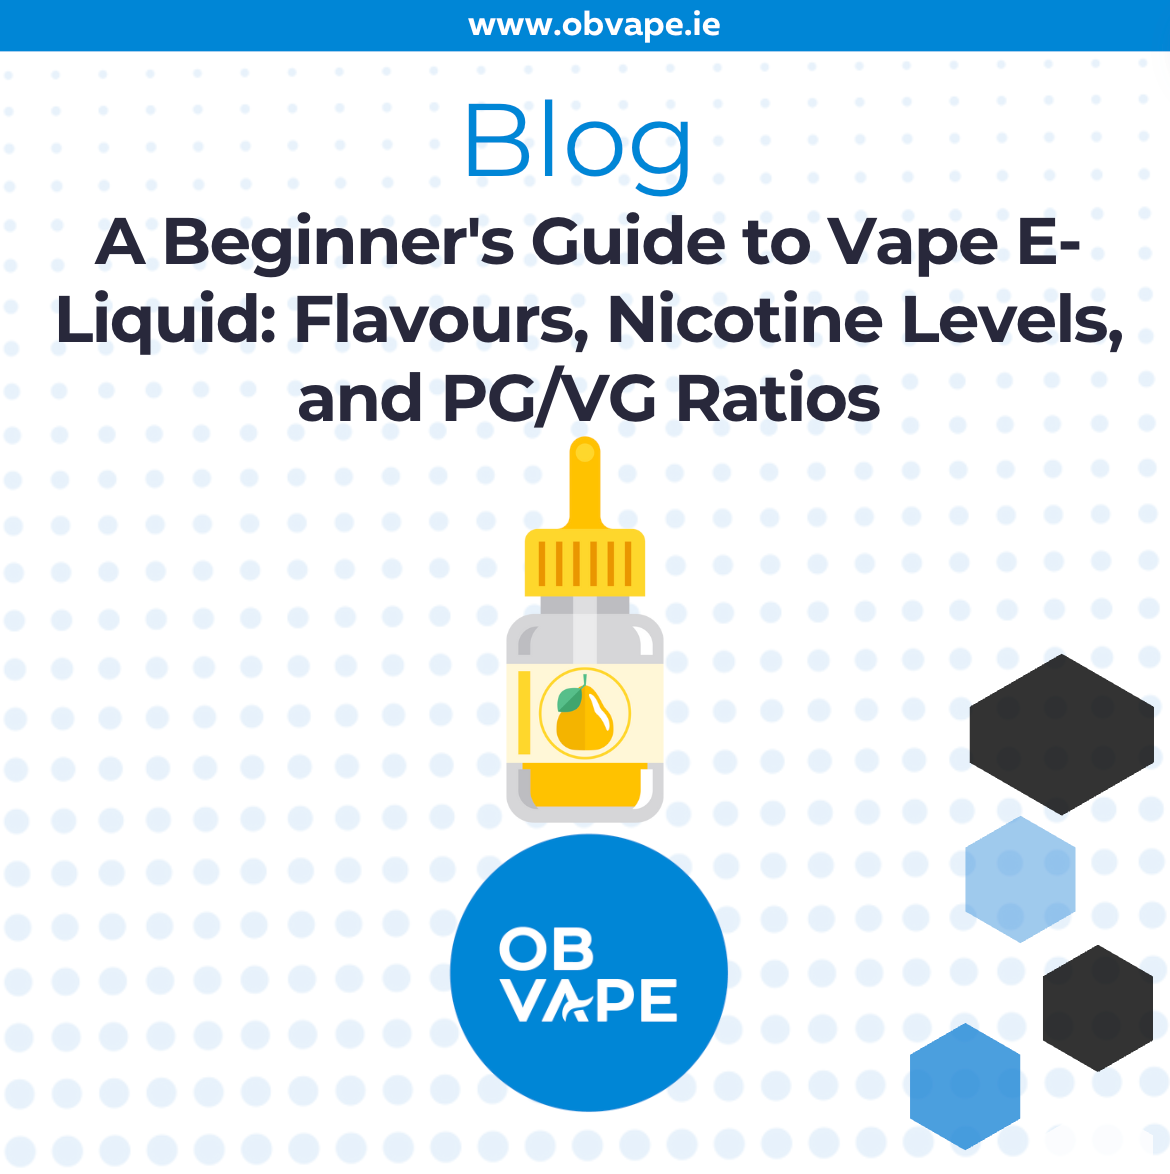 A Beginner's Guide to Vape E-Liquid: Flavours, Nicotine Levels, and PG/VG Ratios